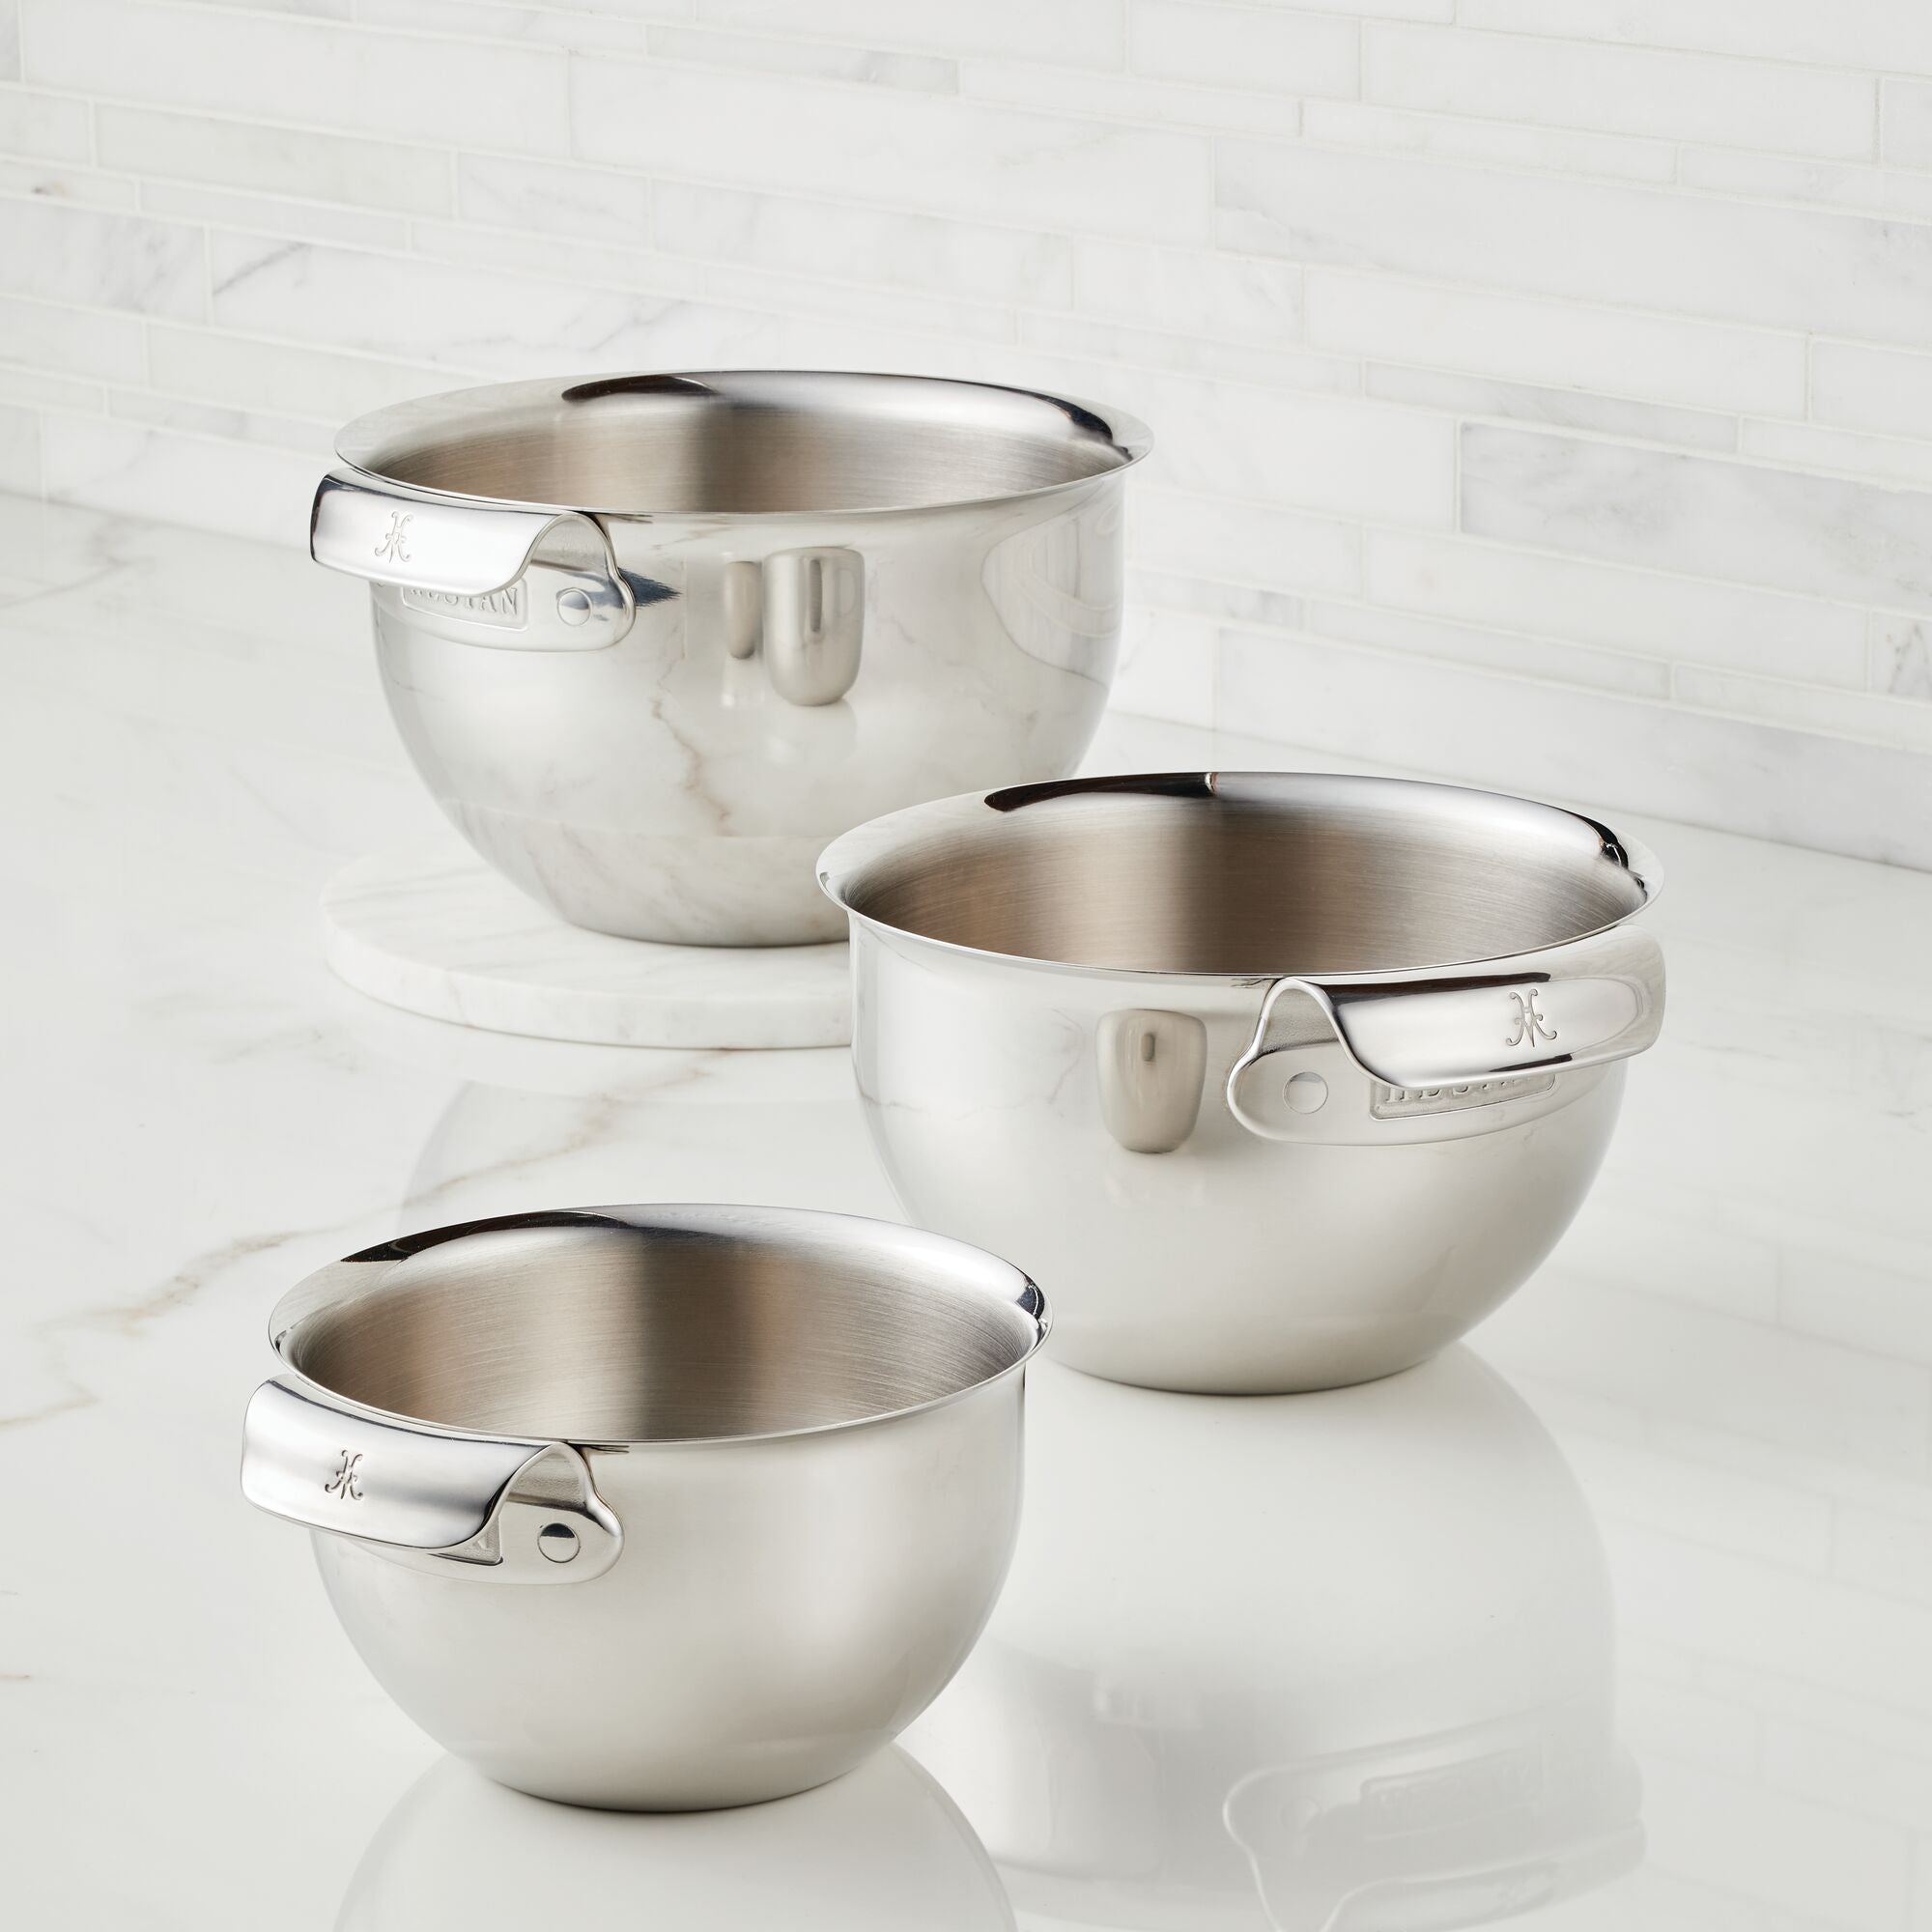 Stainless Steel Mixing Bowls with Handle and Spout, Set of 3